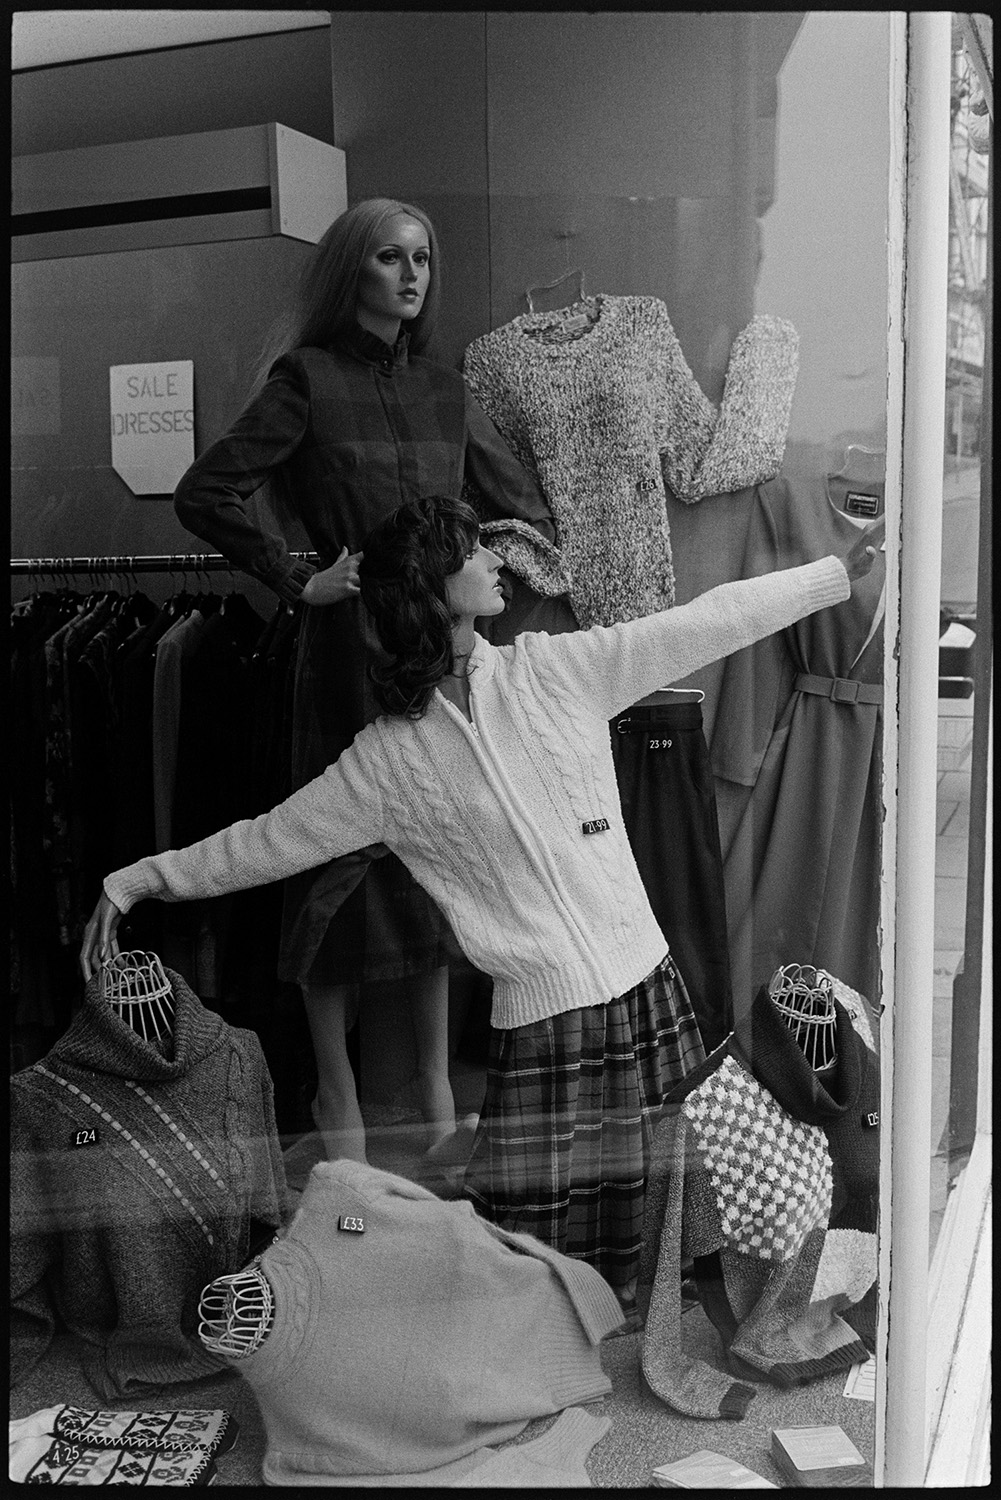 Dummies in clothes shop window. 
[Two mannequins modelling women's clothes in a clothes shop window in Barnstaple. They are modelling jumpers and skirts.]